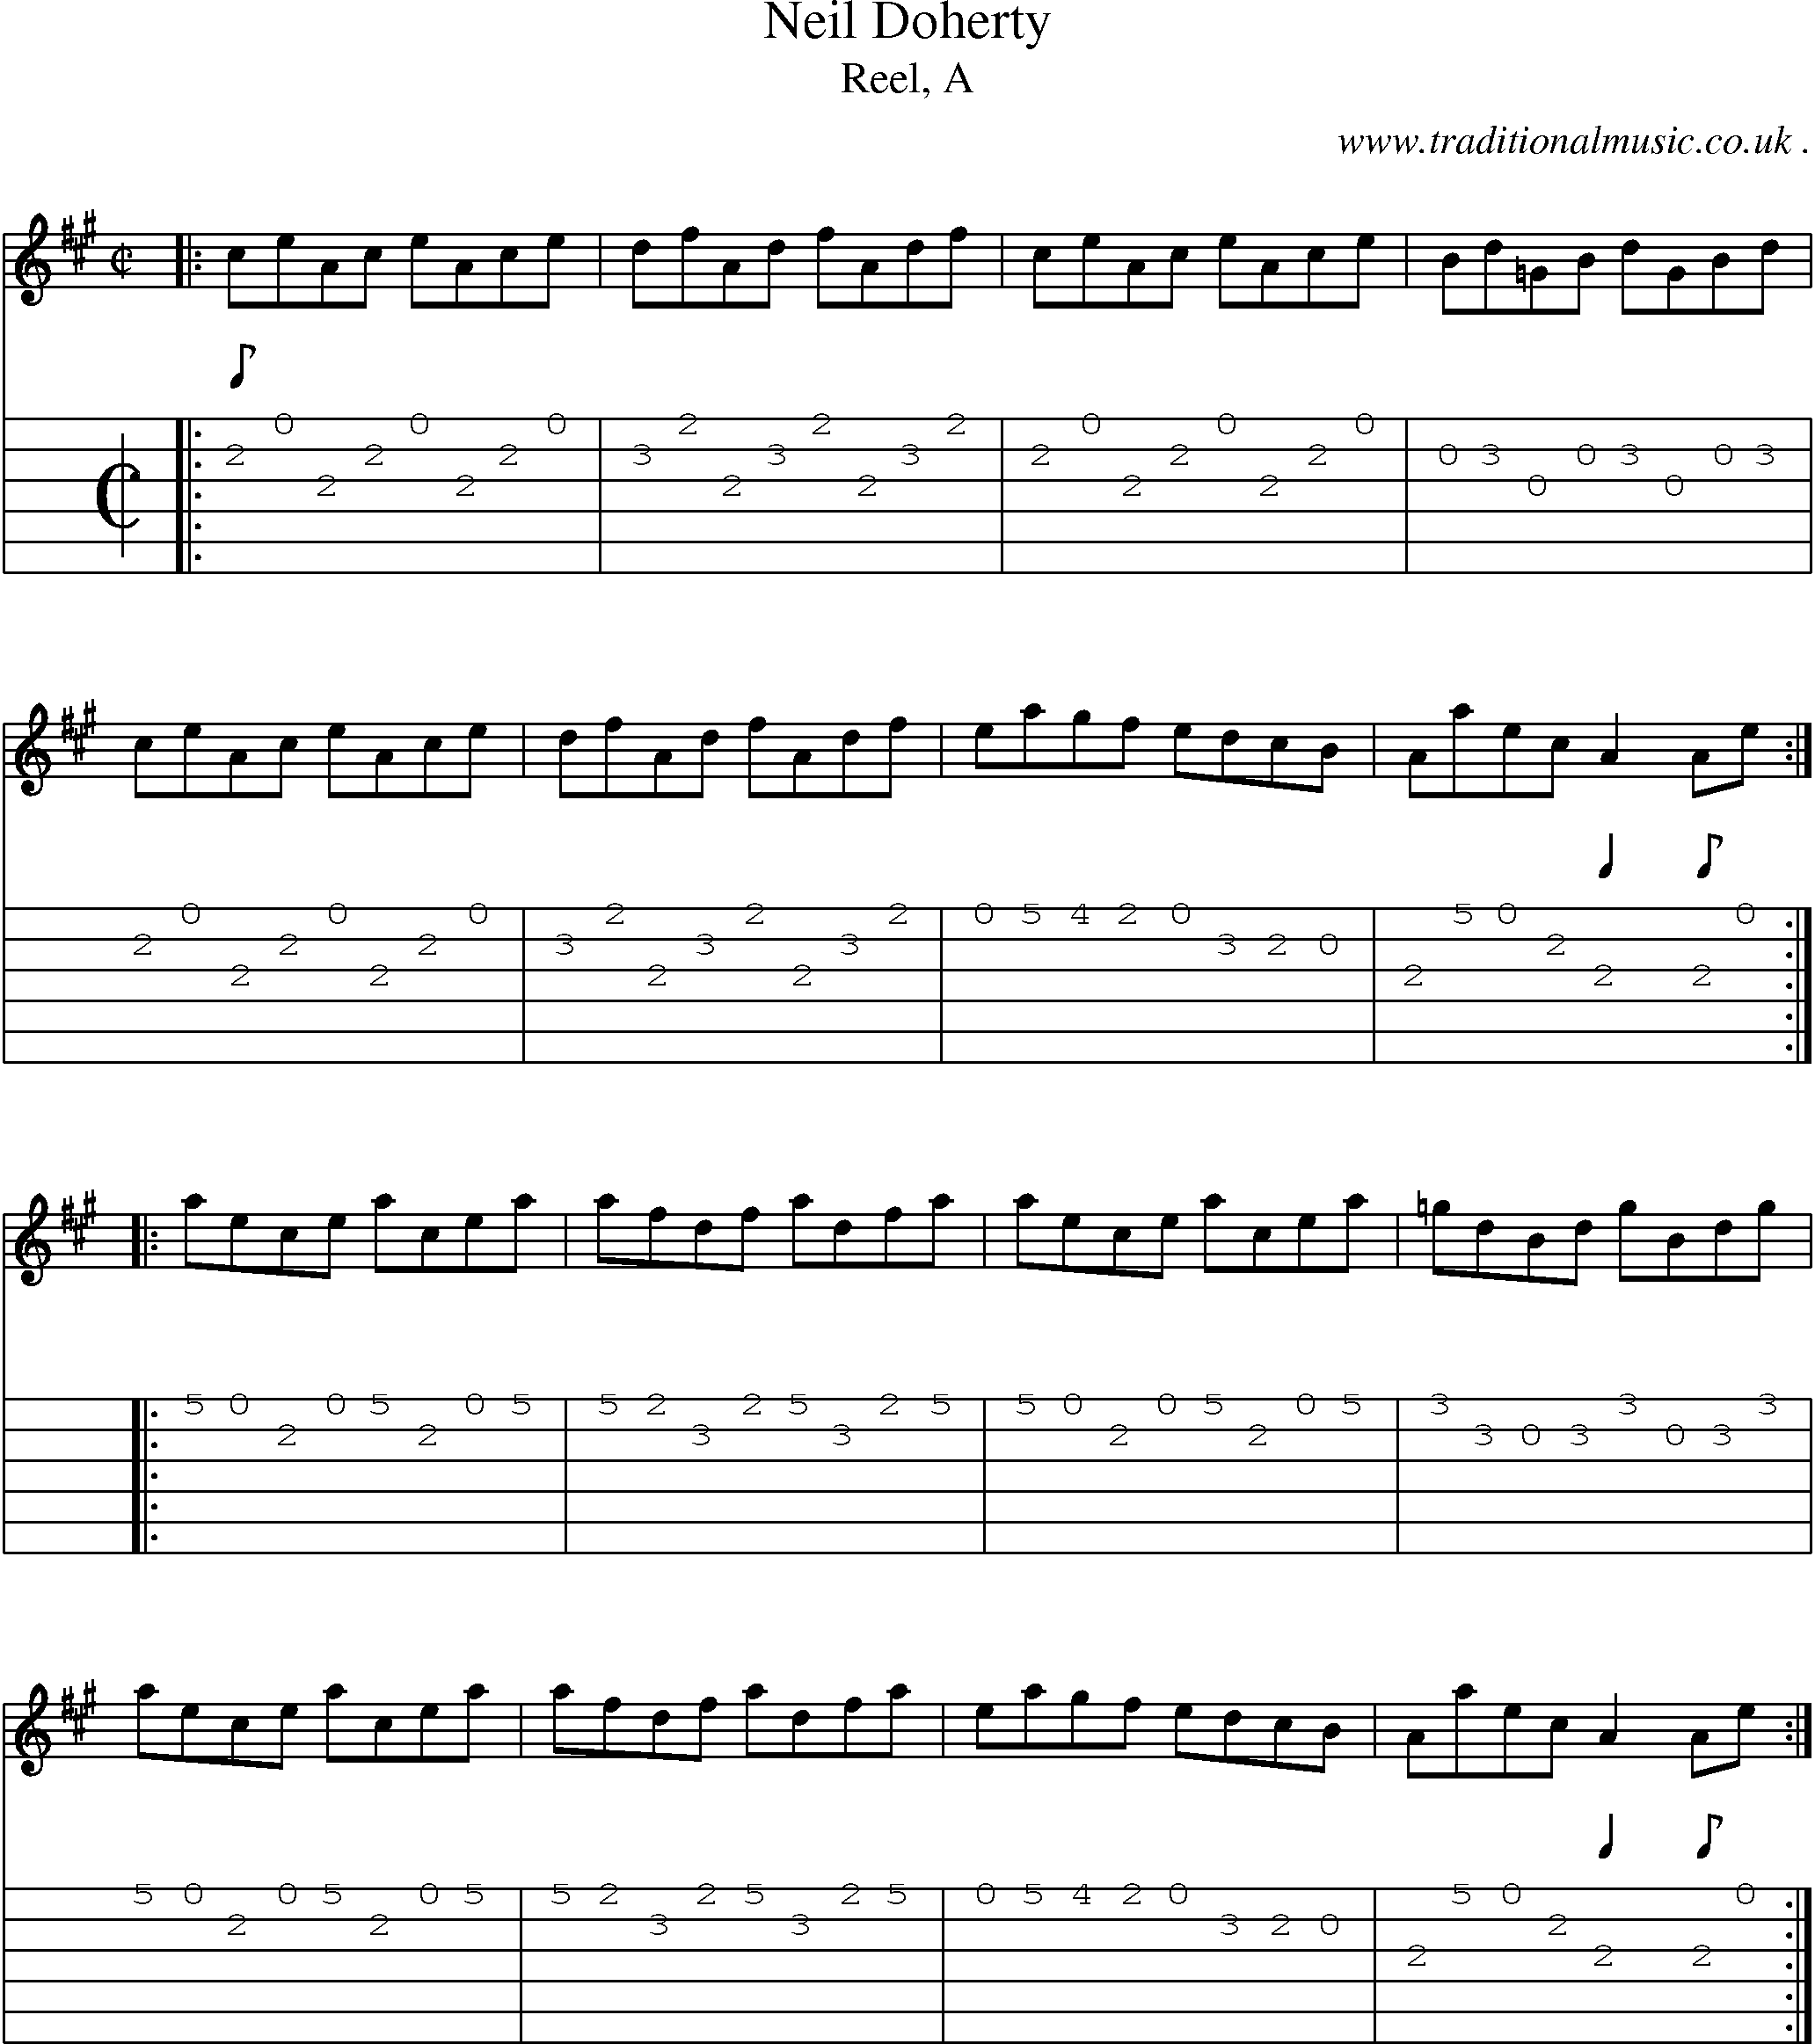 Sheet-music  score, Chords and Guitar Tabs for Neil Doherty